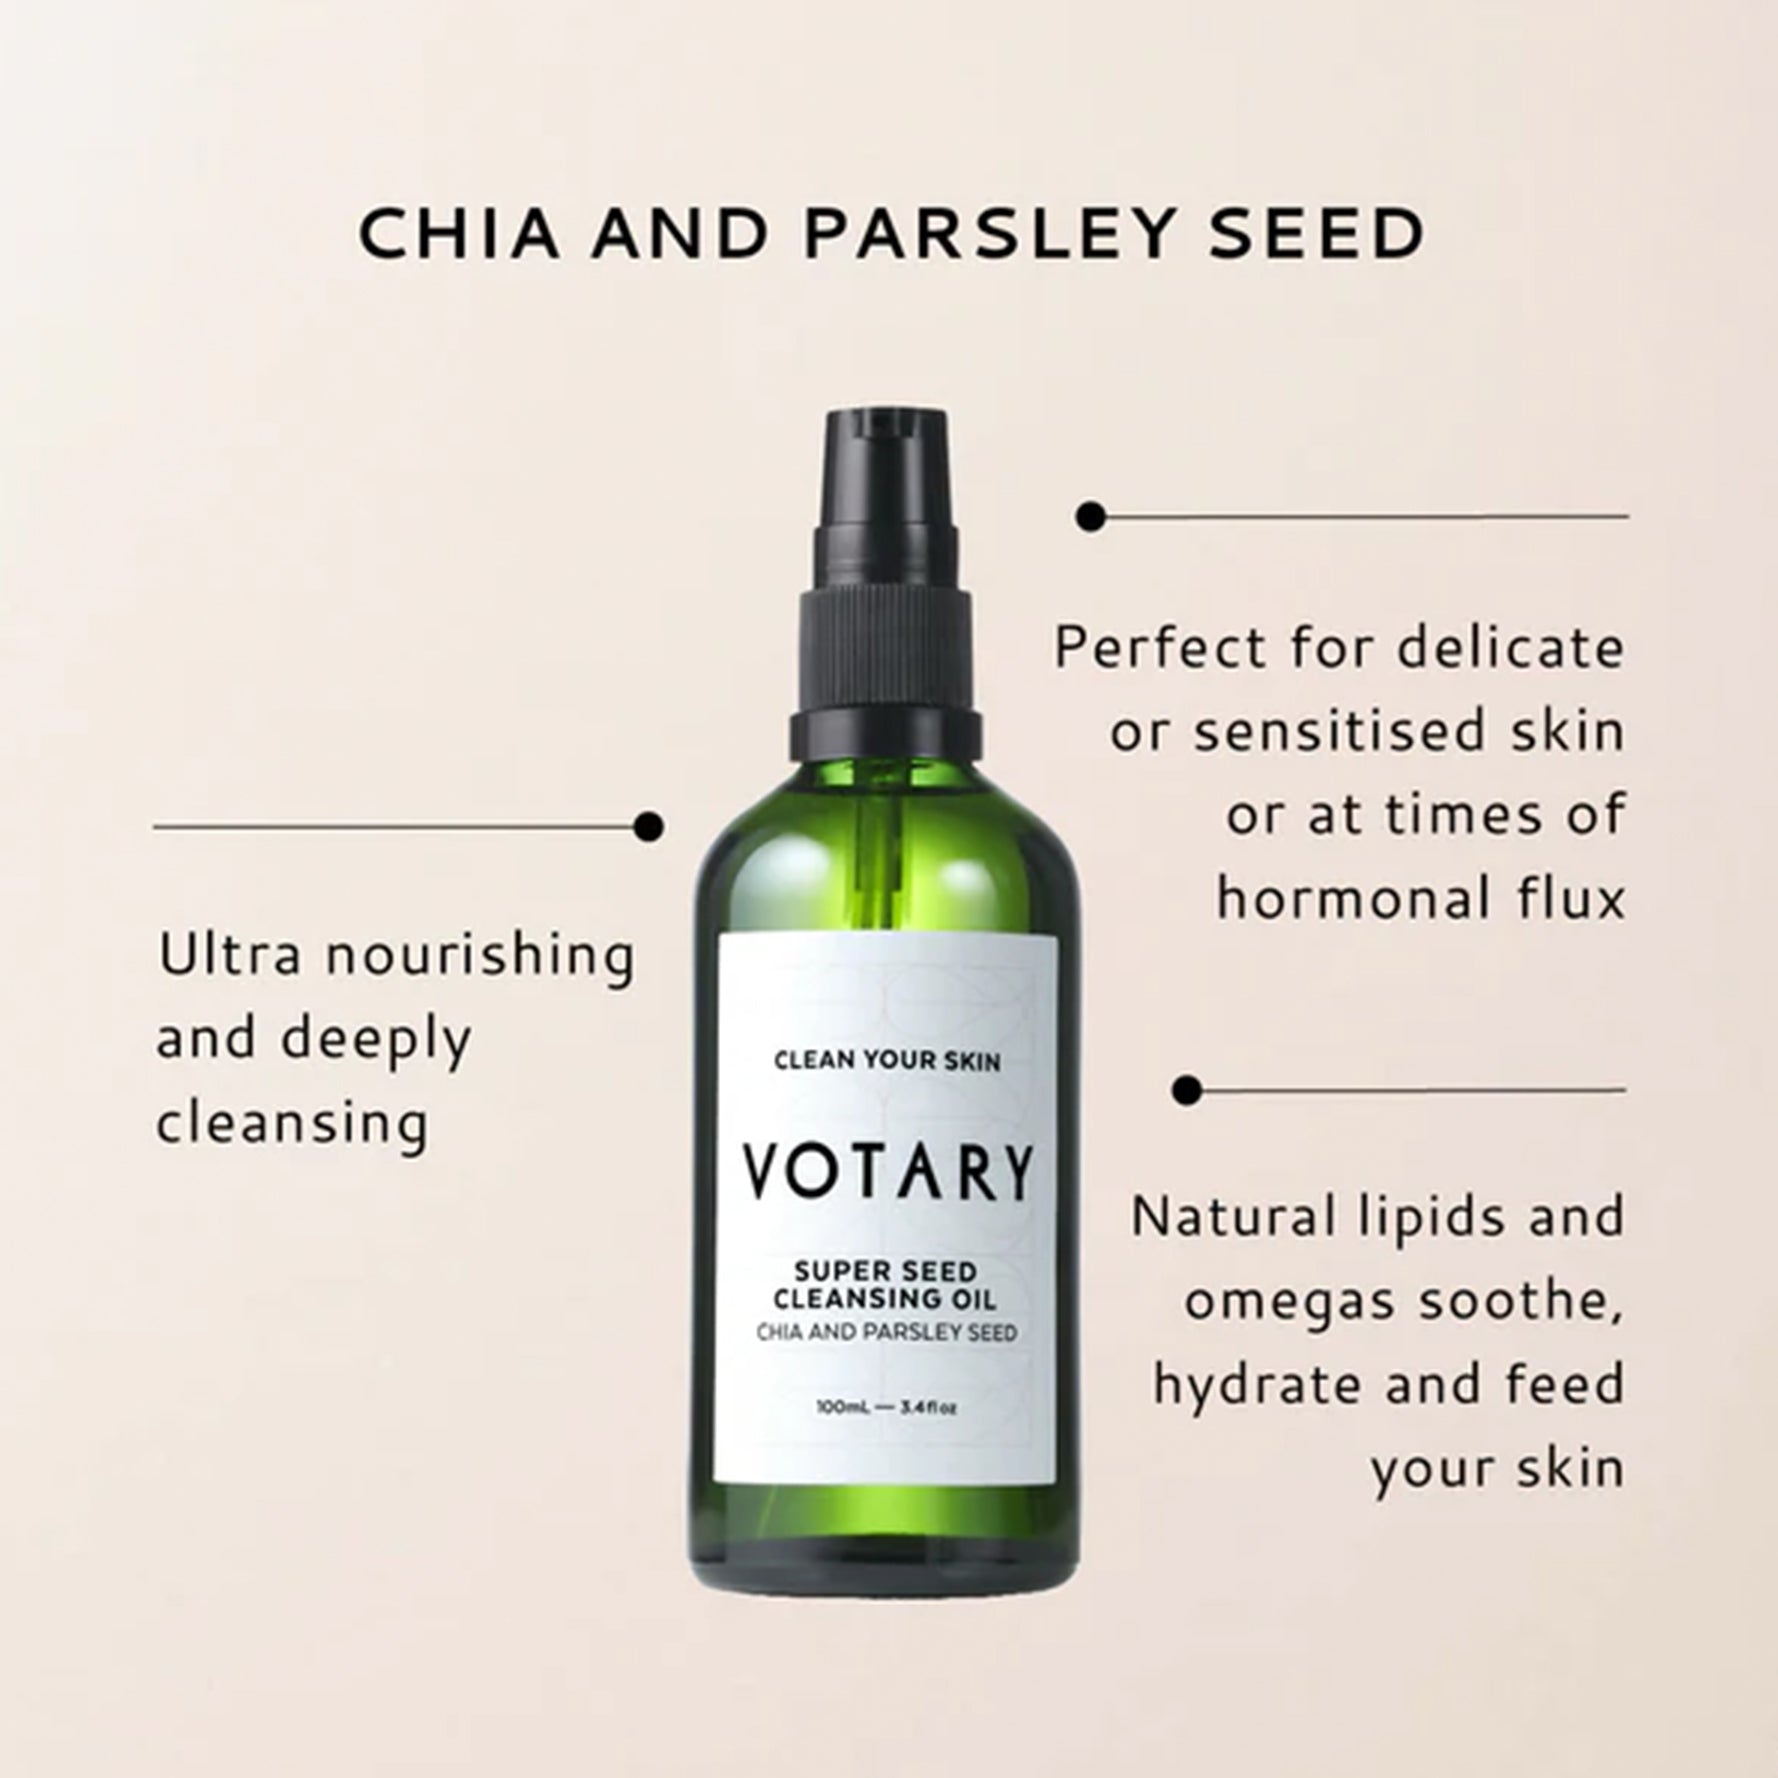 Votary - Super Seed Cleansing Oil - Chia and Parsley Seed